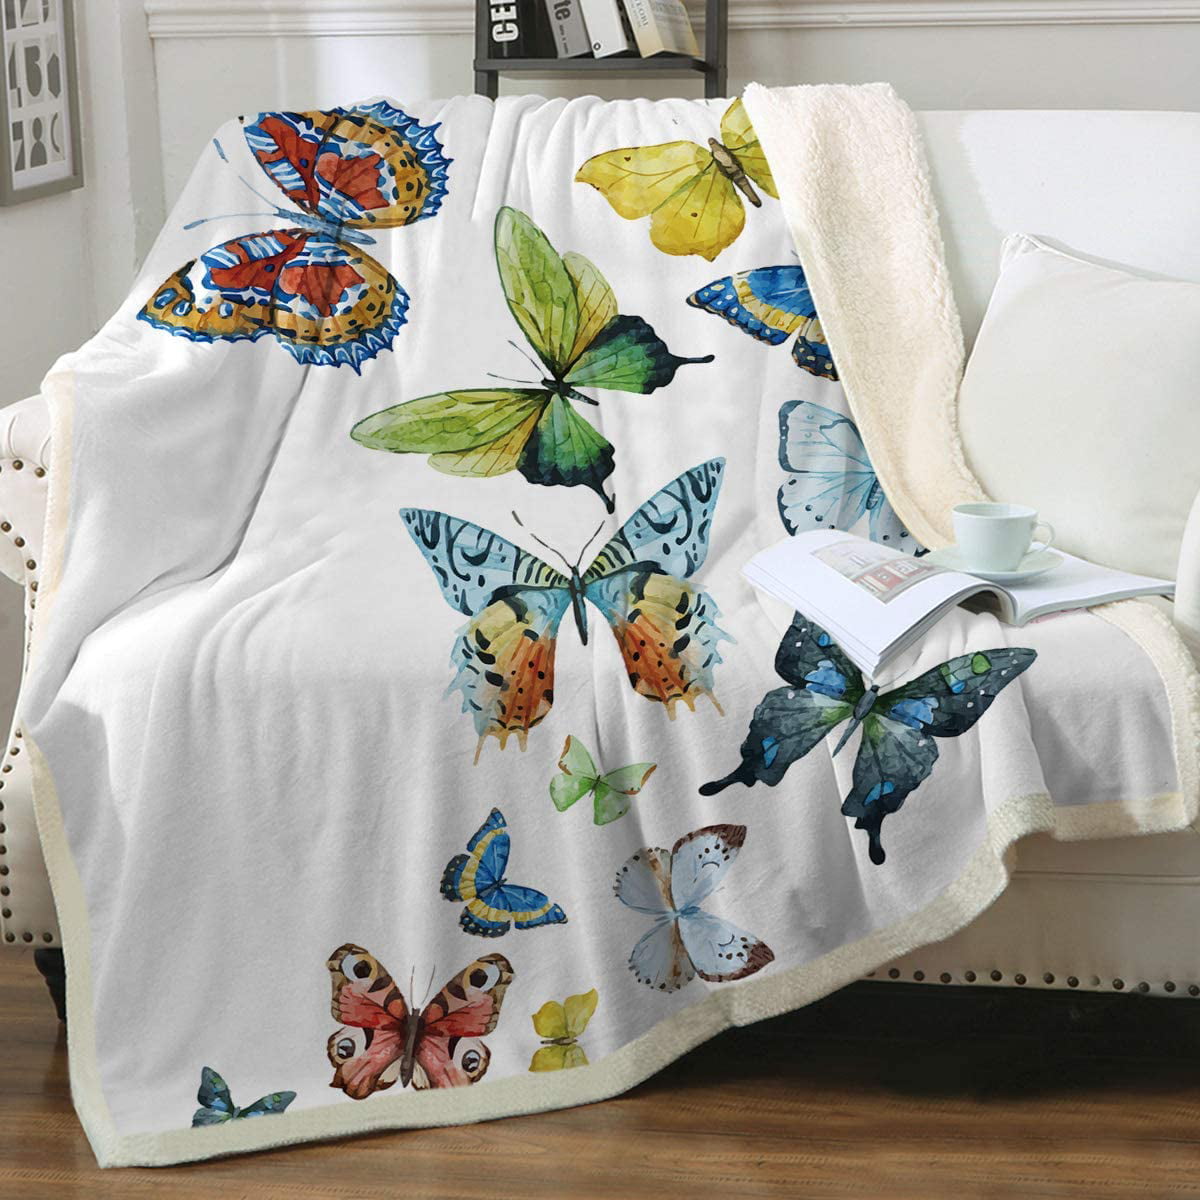 NEW BUTTERFLY TEENS GIRLS SOFTY COMFORTER WITH SHERPA WARM QUEEN 